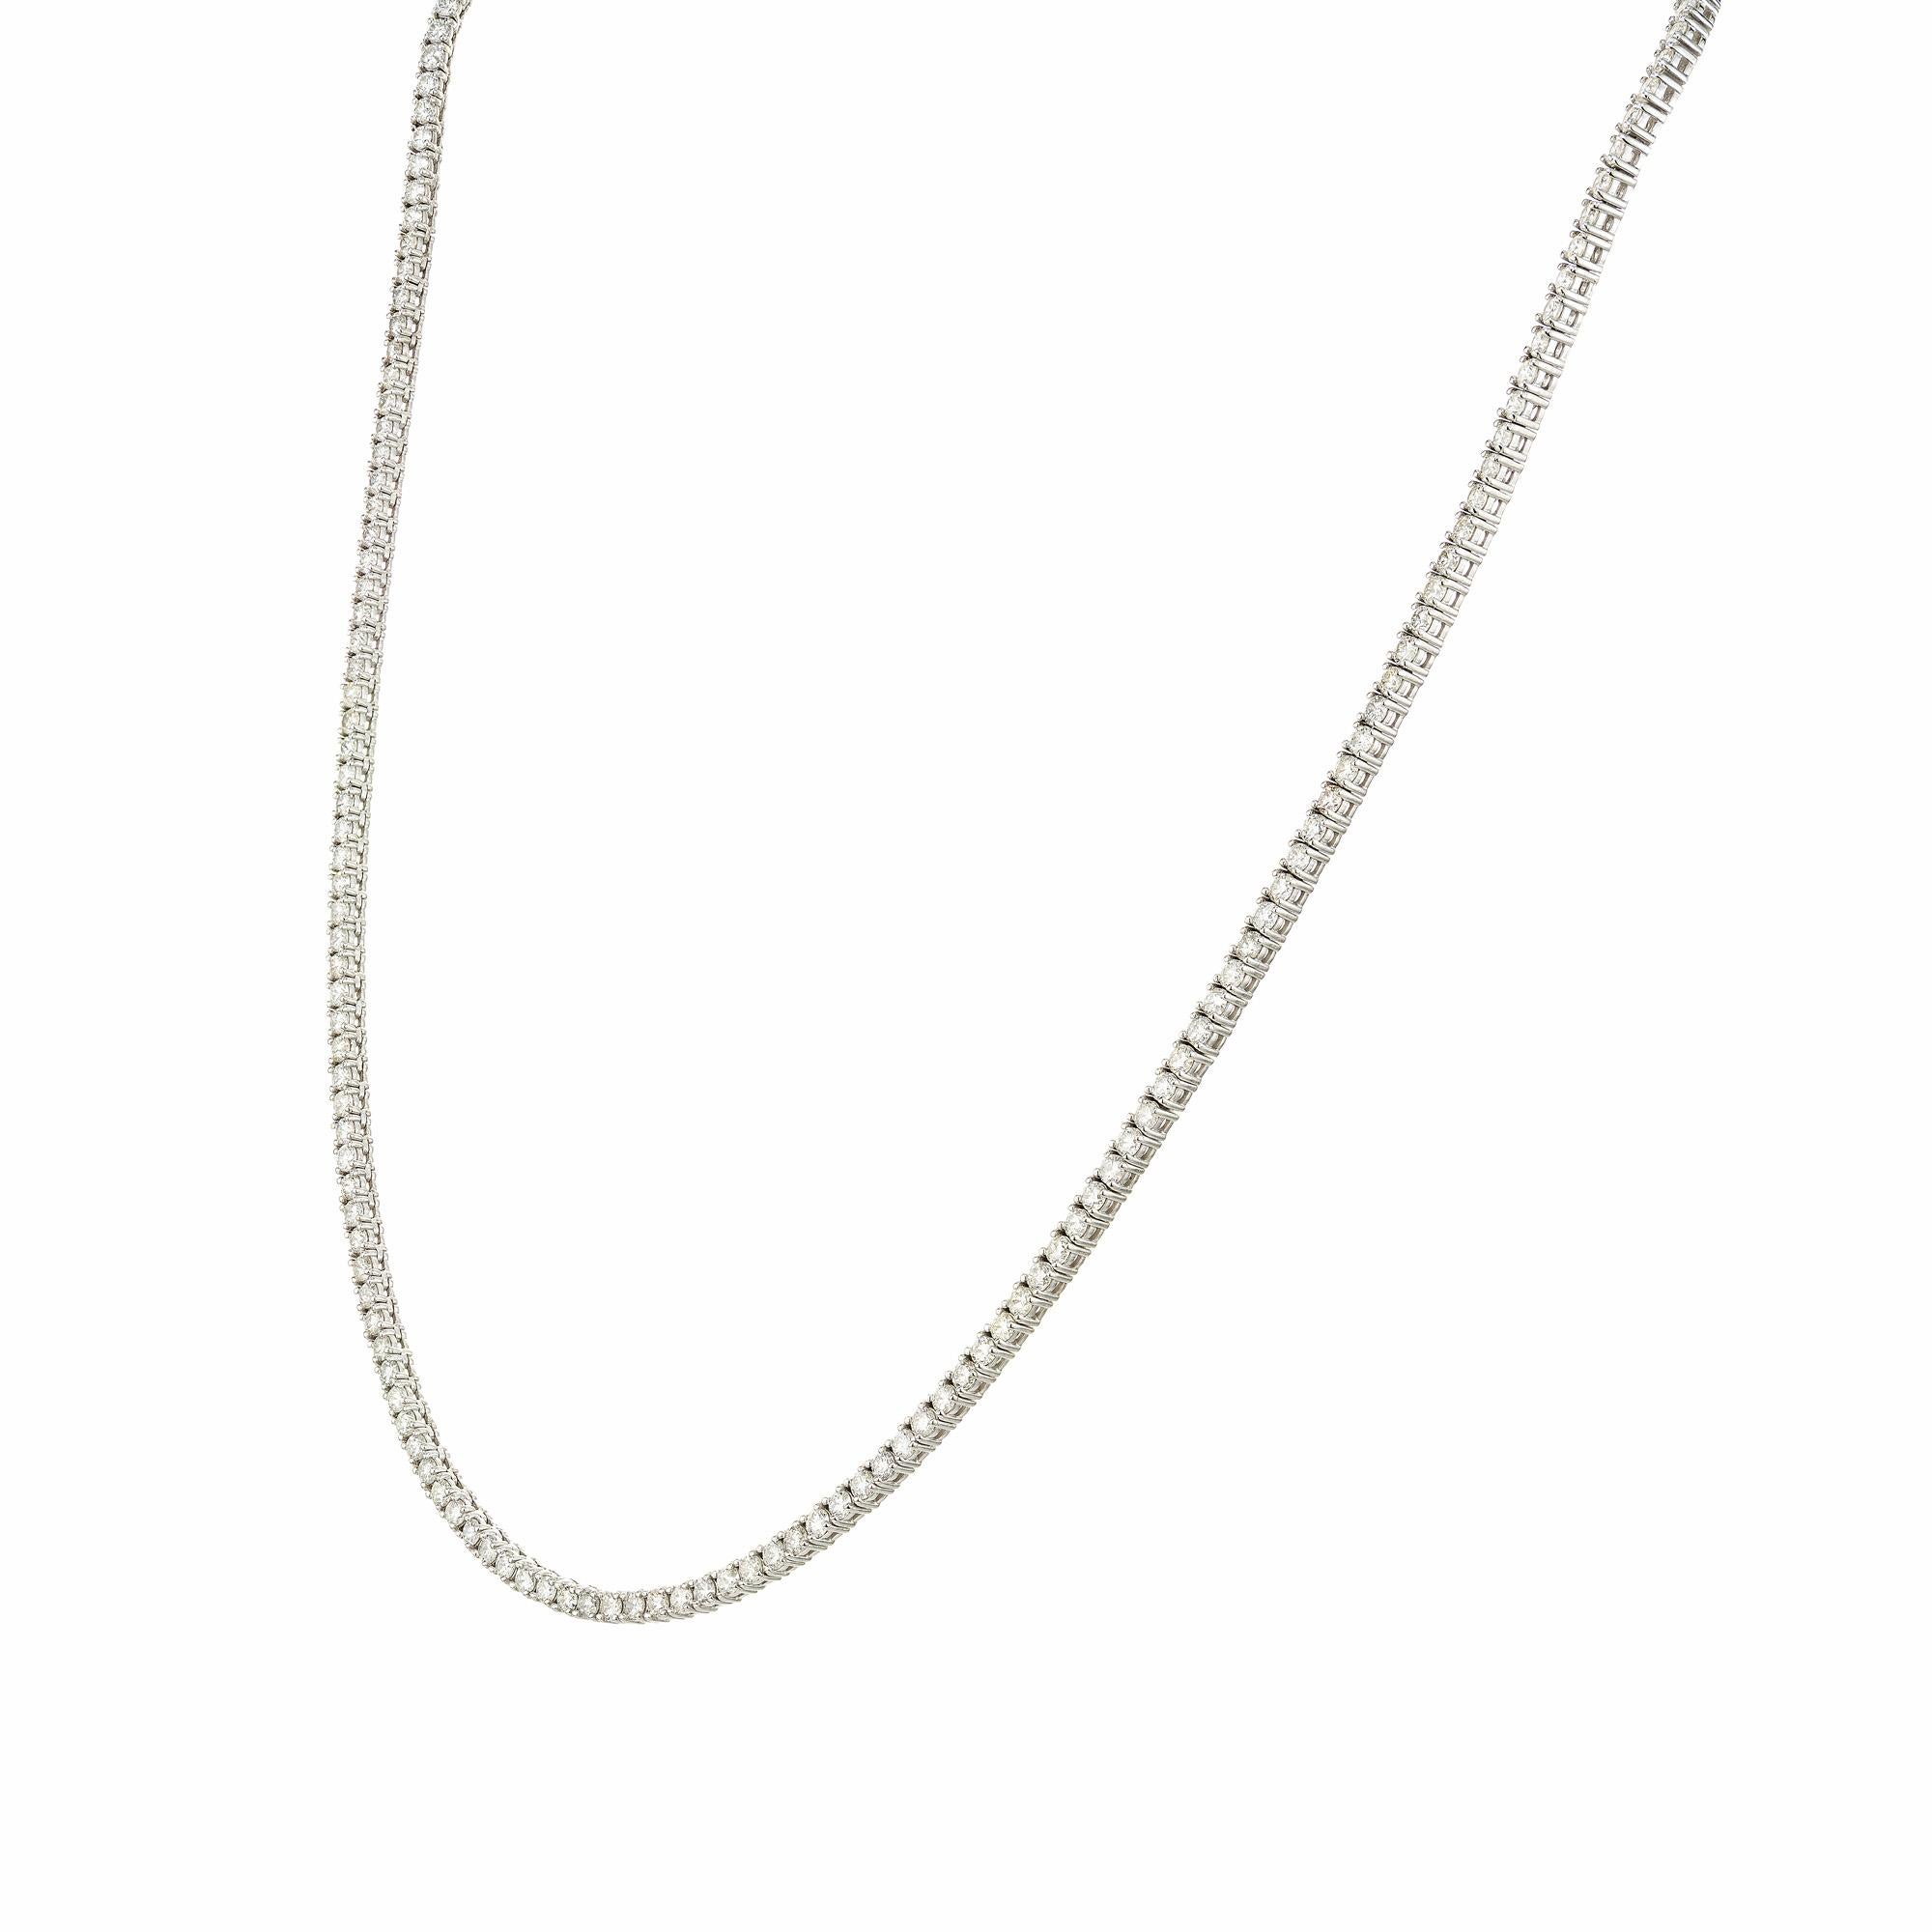 Classic diamond tennis necklace. 5.50 Carats of sparkly full cut diamonds. This necklace features a stunning array of 187 round brilliant diamonds, meticulously set in a sleek 14 white gold chain. The clasp has a secure safety catch. The white gold